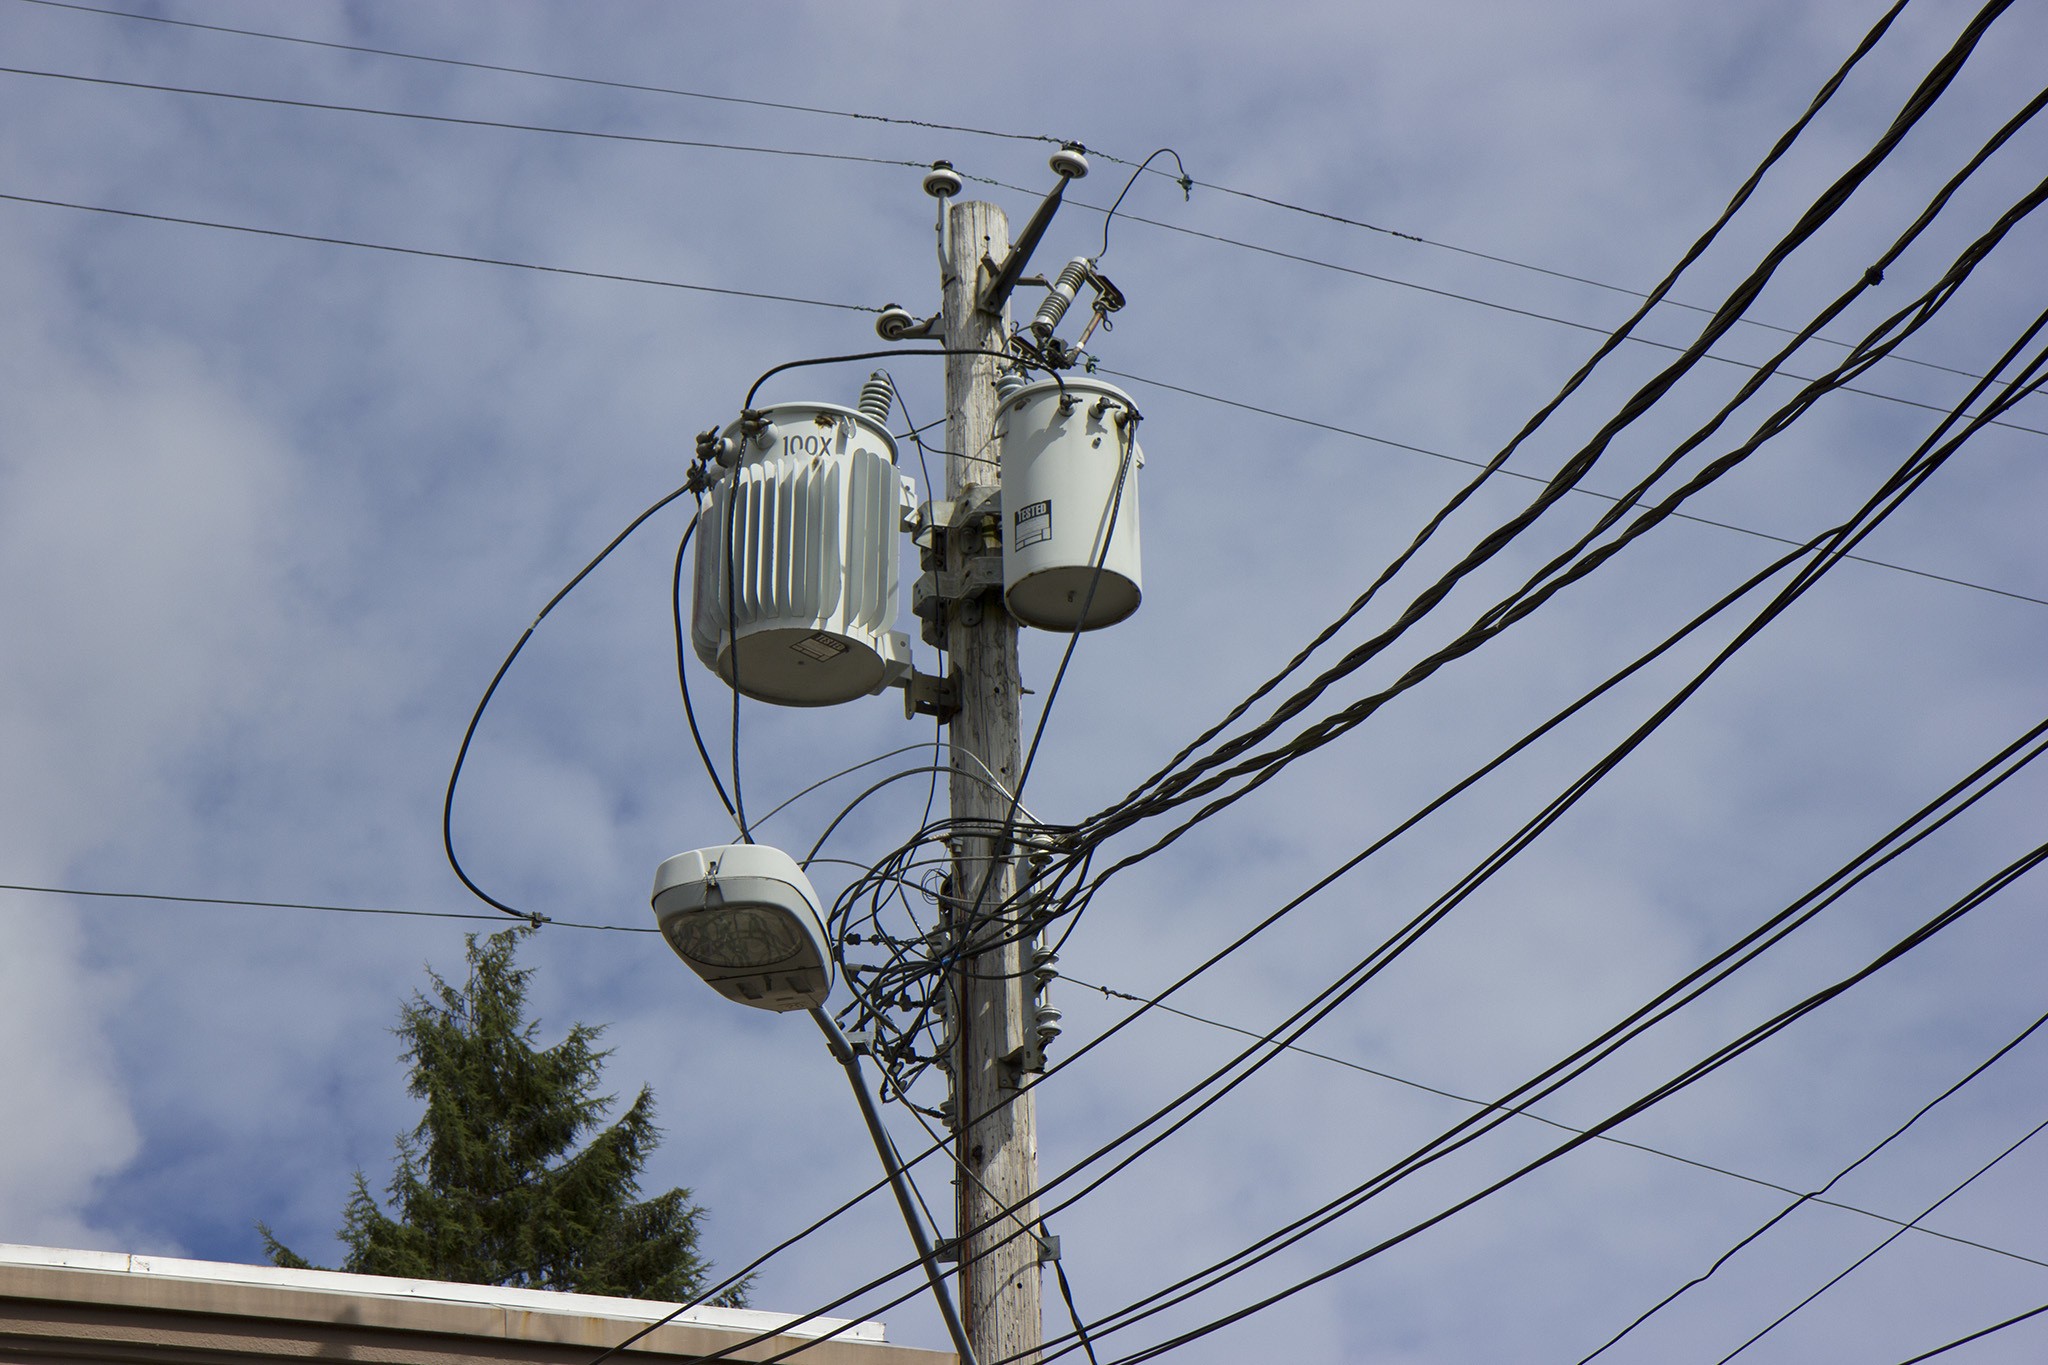 Overnight outage planned for downtown Montesano